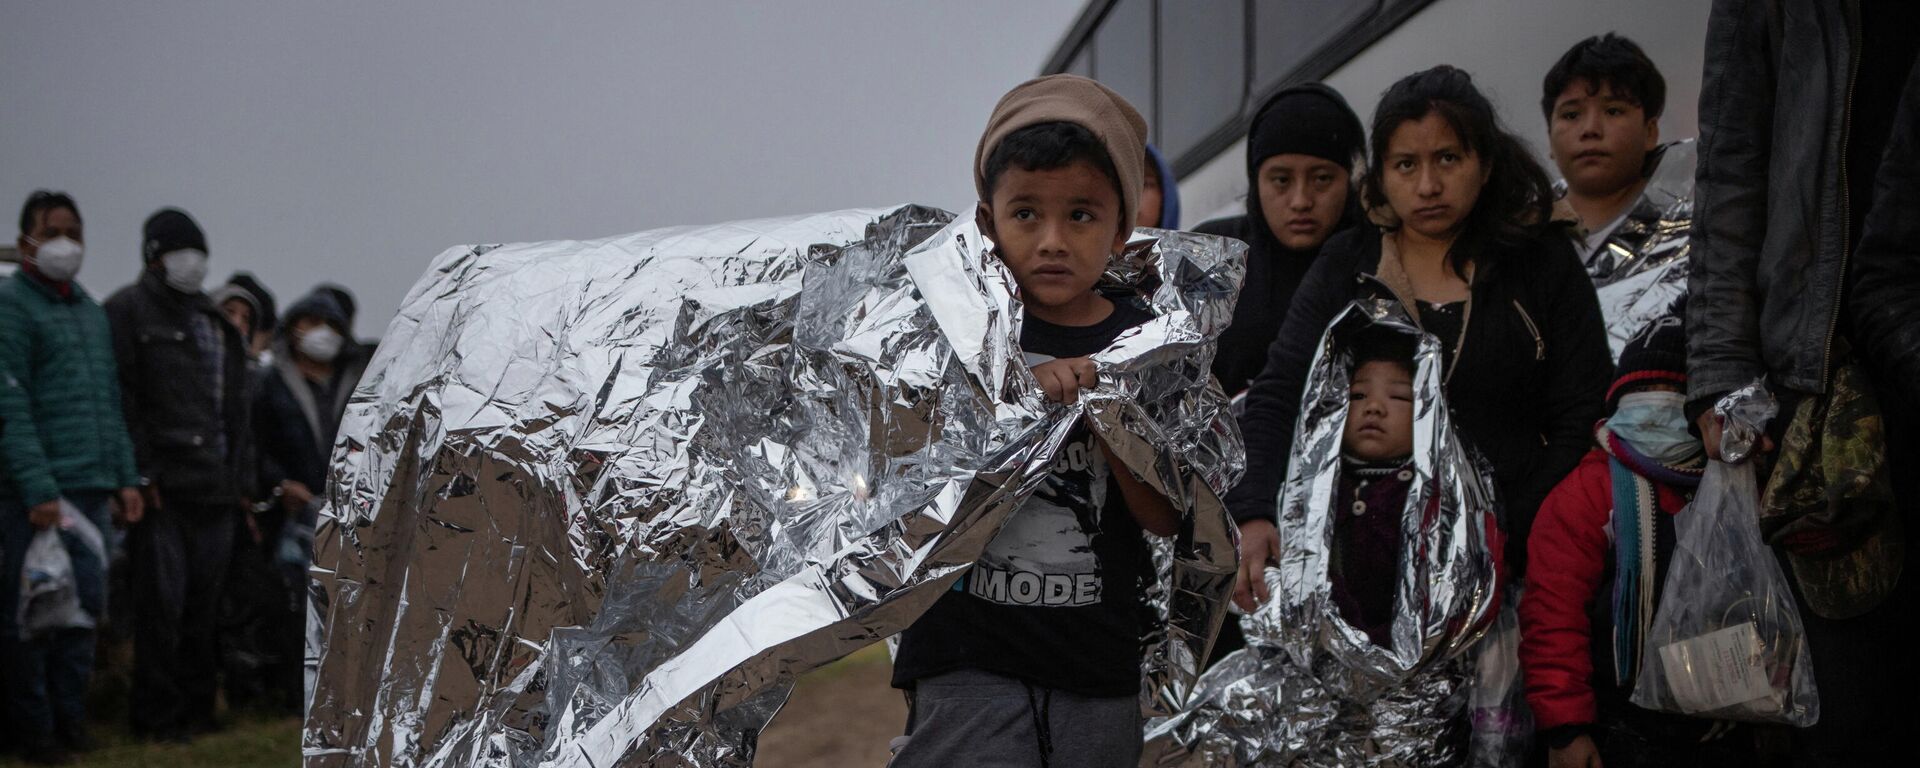 Issac, a seven year old unaccompanied migrant boy from Honduras, holds an emergency blanket as he is asked by a Customs and Border Protection official to board a bus after crossing the Rio Grande river into the United States from Mexico in Penitas, Texas, U.S., February 24, 2022 - Sputnik International, 1920, 12.03.2022